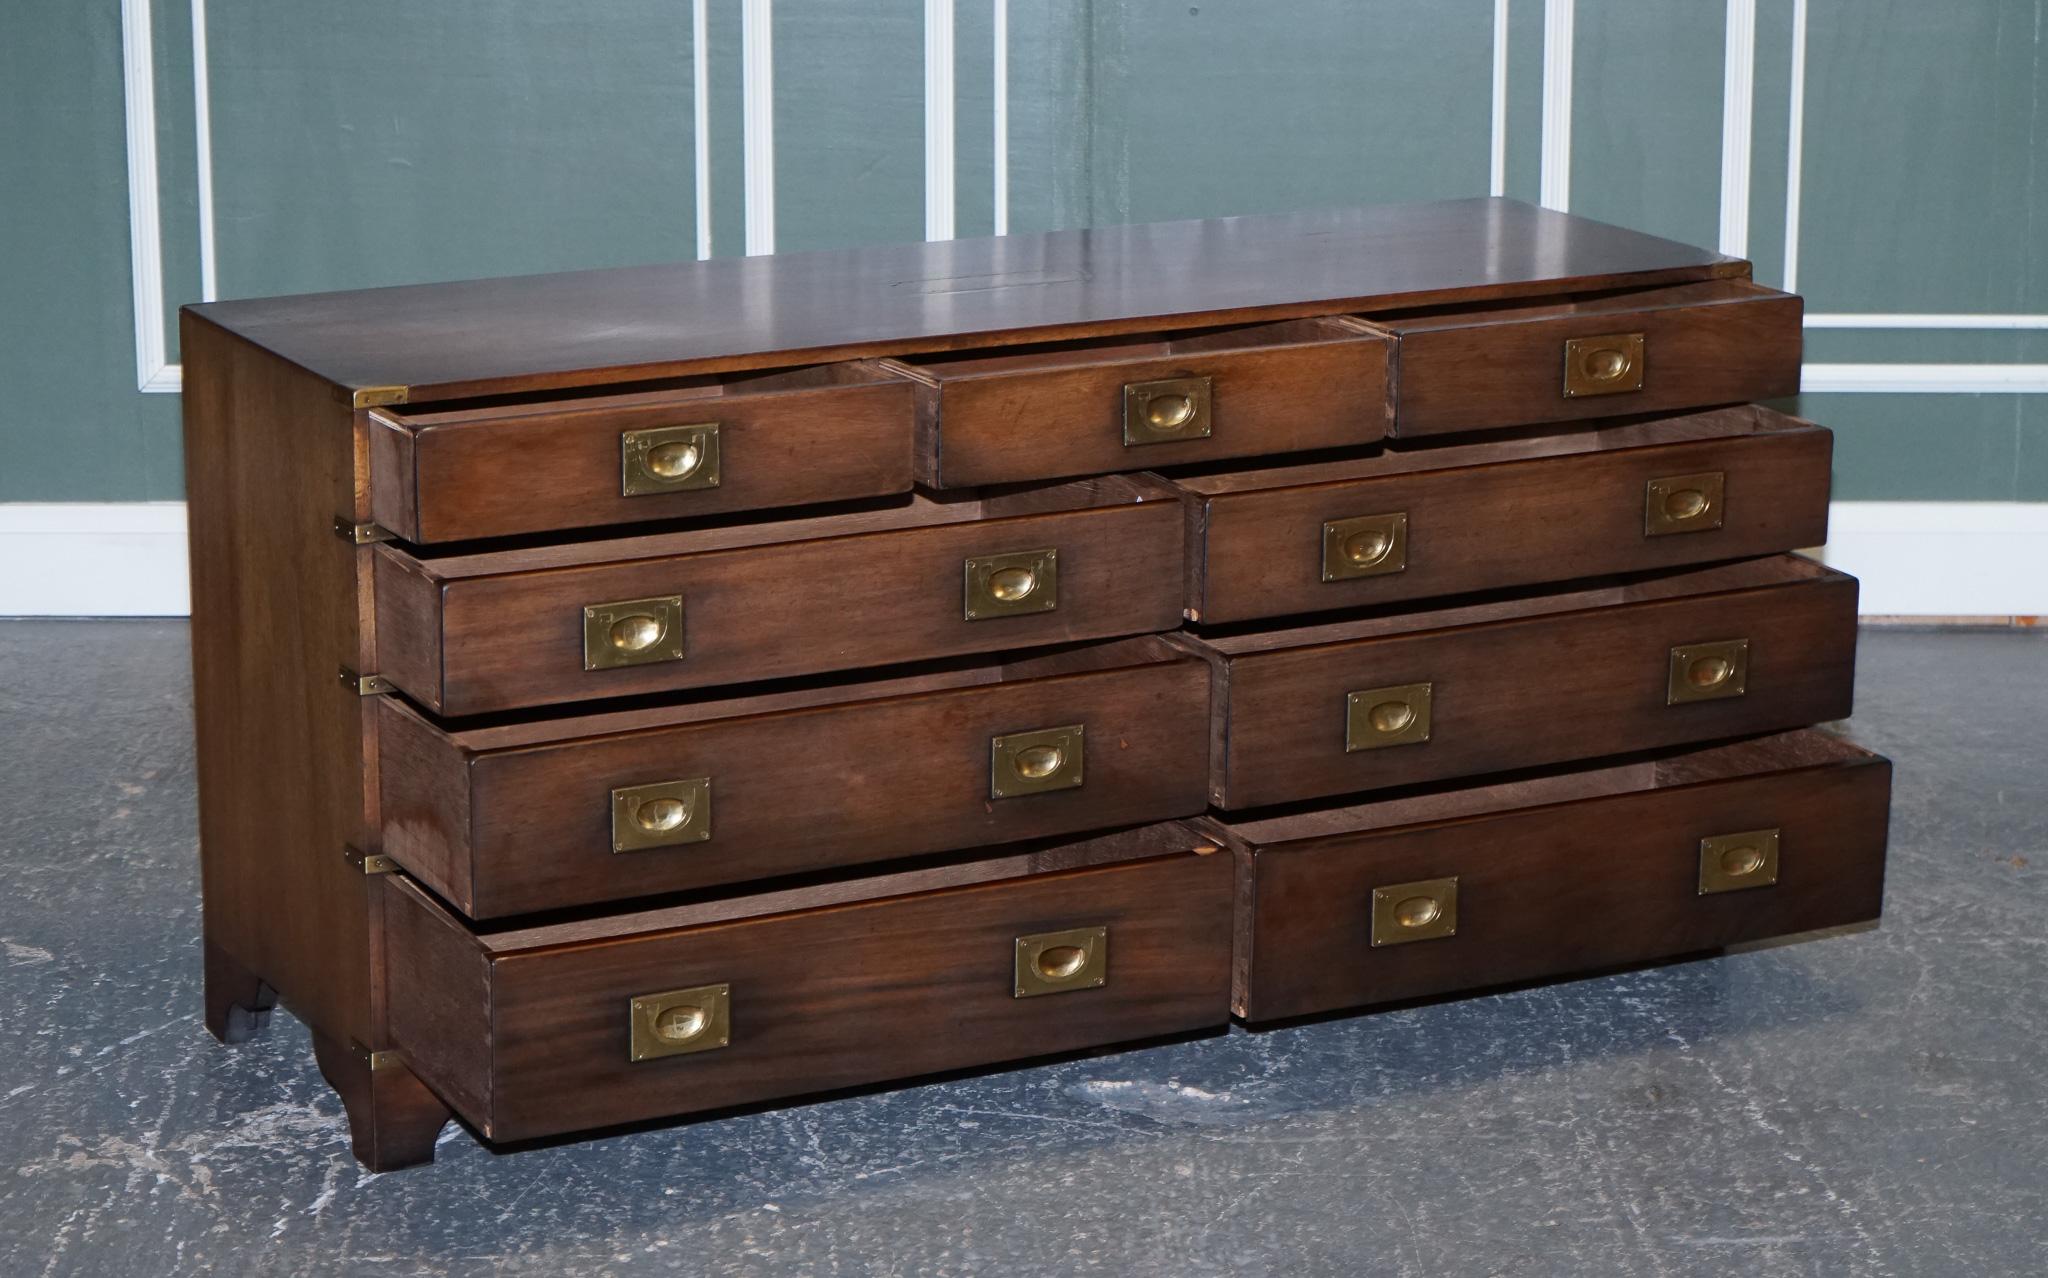 British Harrods London Kennedy Military Campaign Sideboard Chest of Drawers